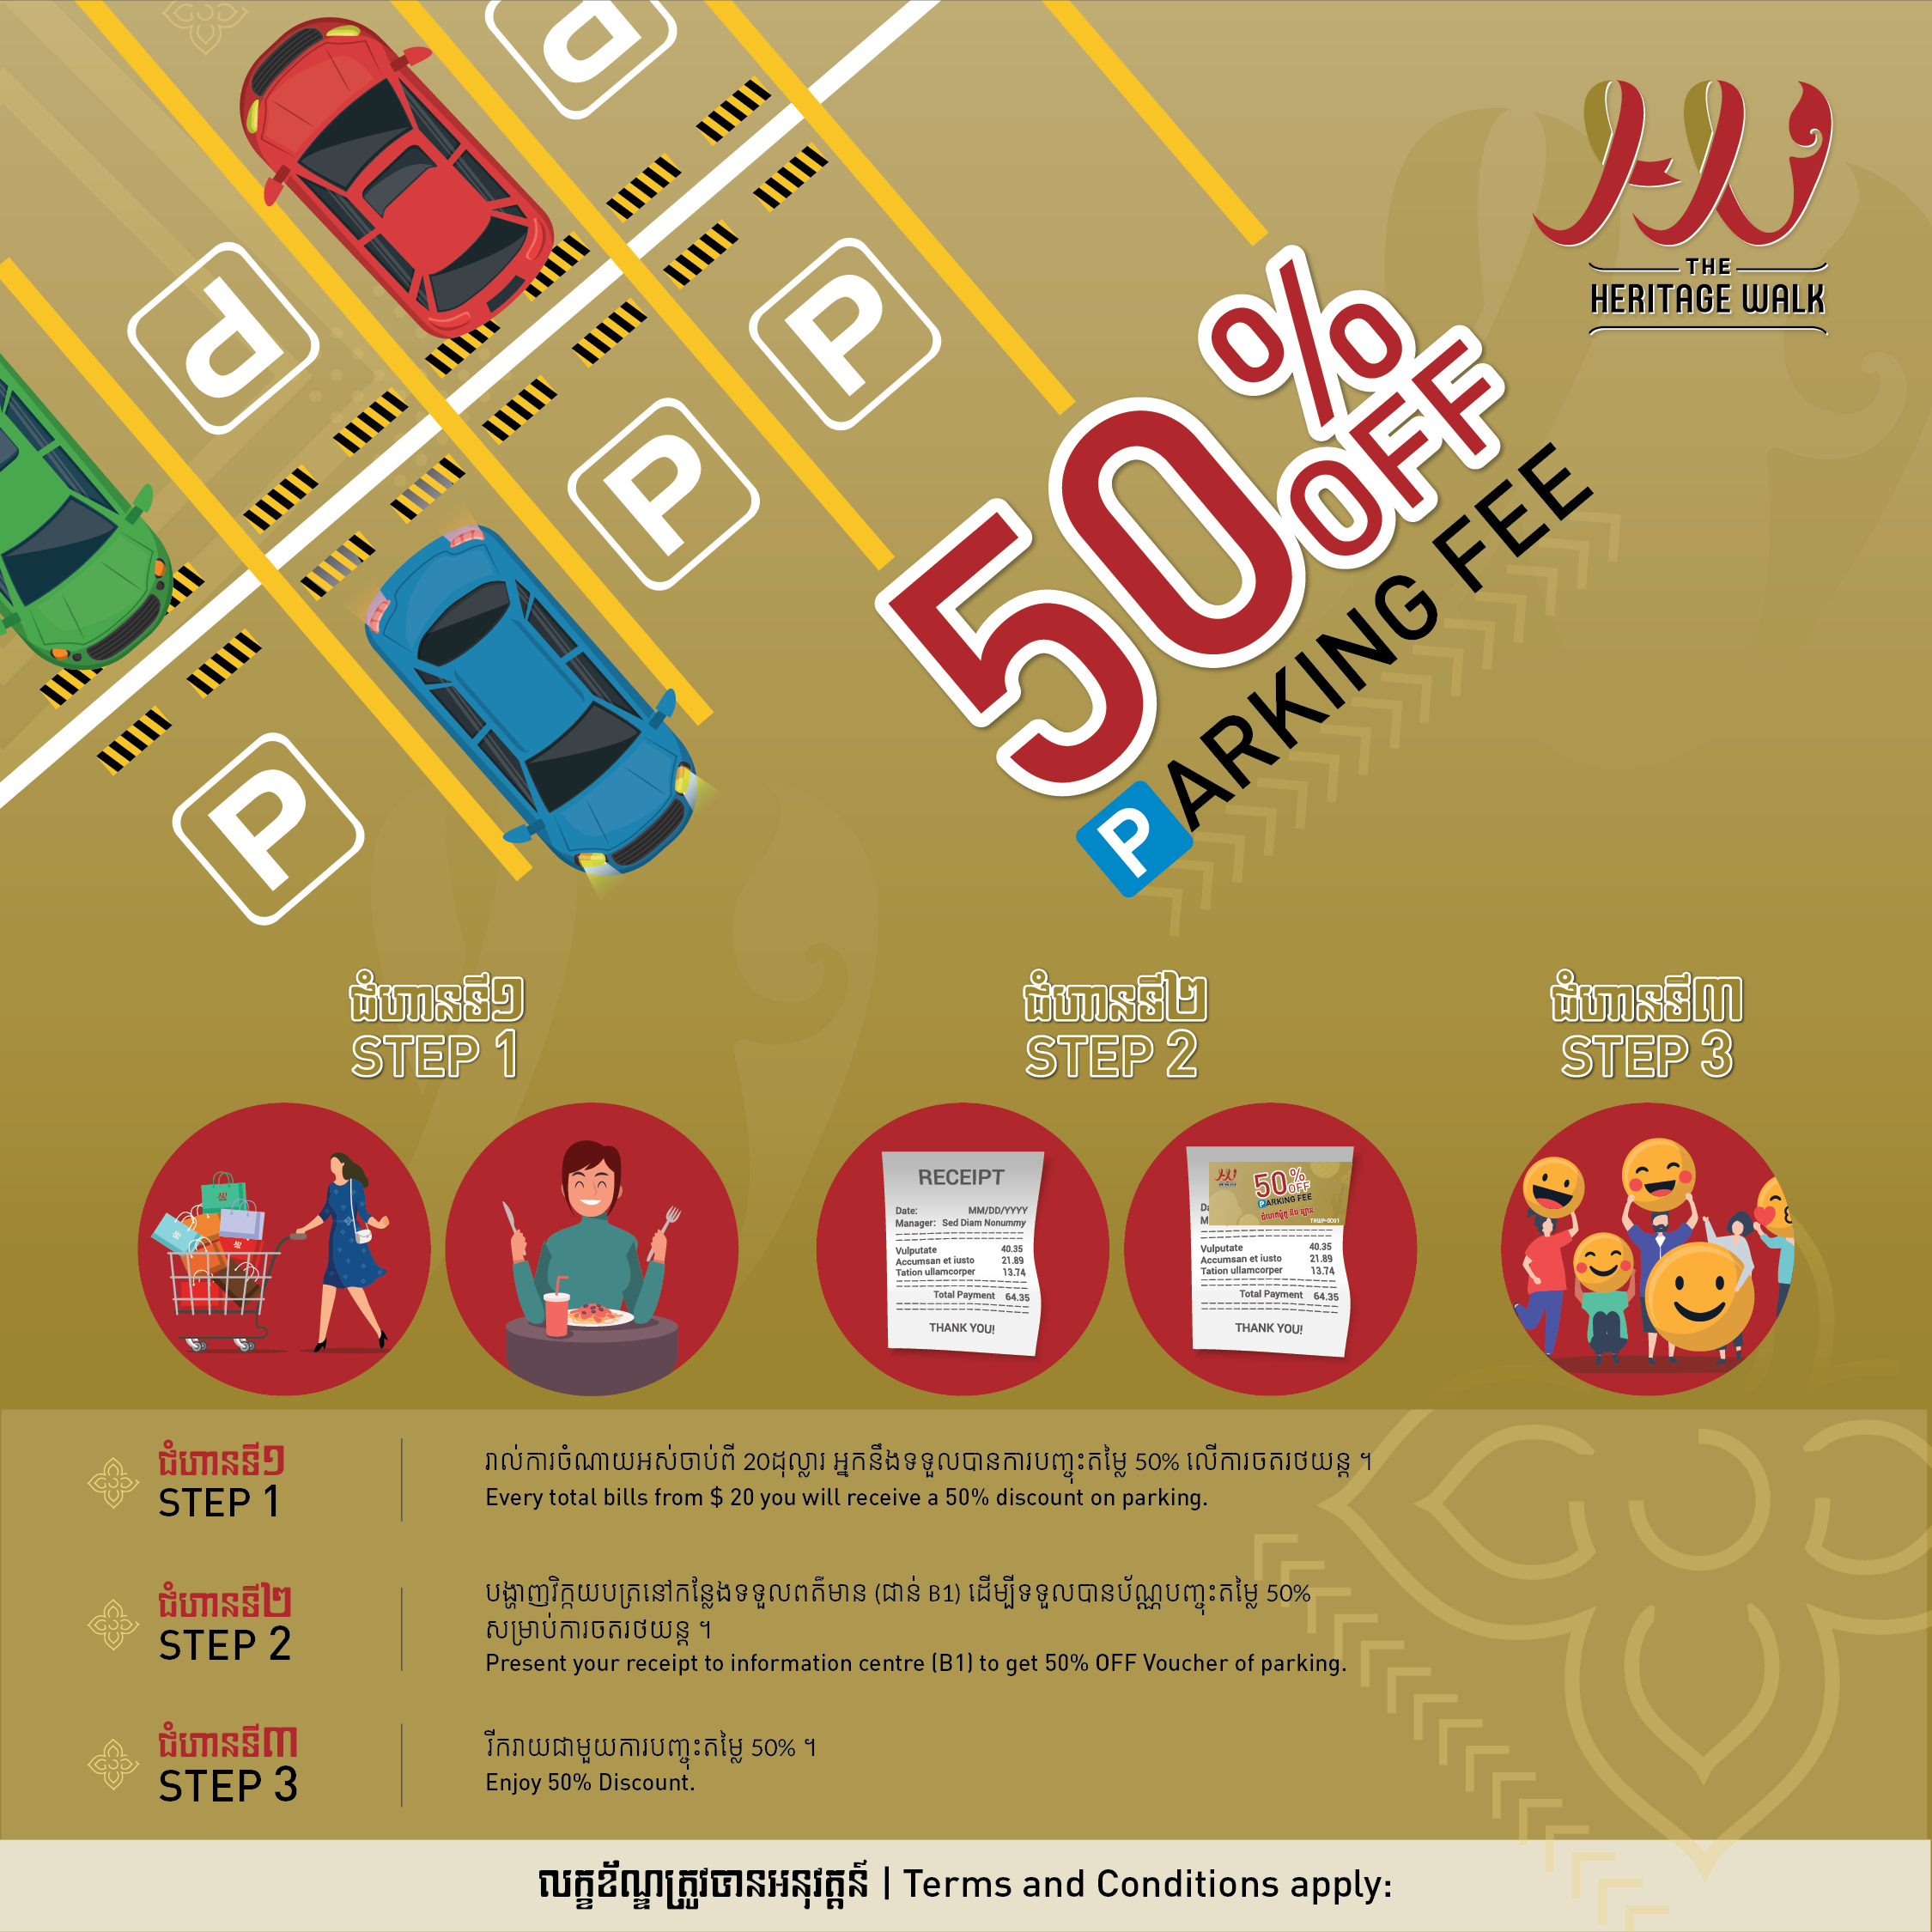 The Heritage Walk 50% Off Car Parking Ticket